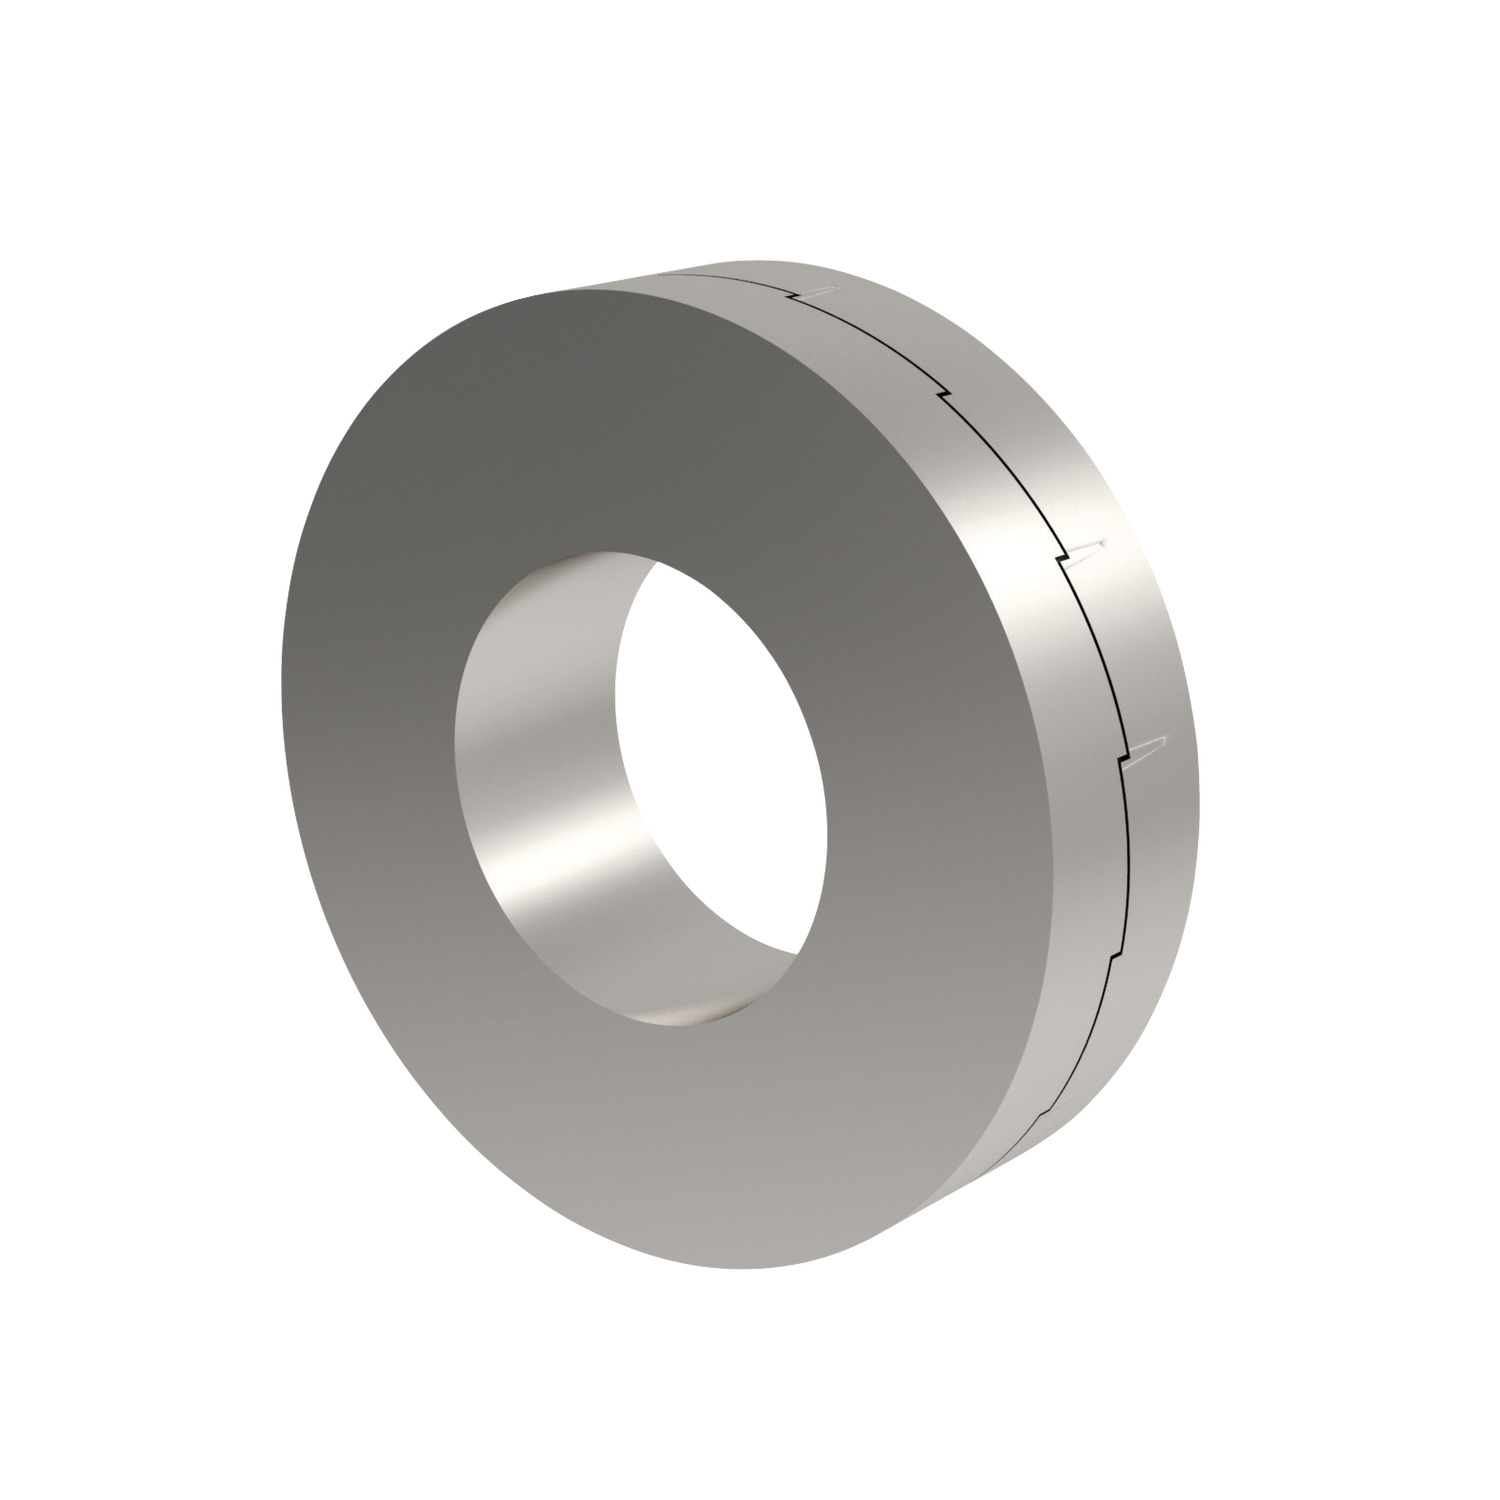 Locking Washers Our range of locking washers available with internal or external serrations in zinc plated steel, stainless steel or self-coloured steel.